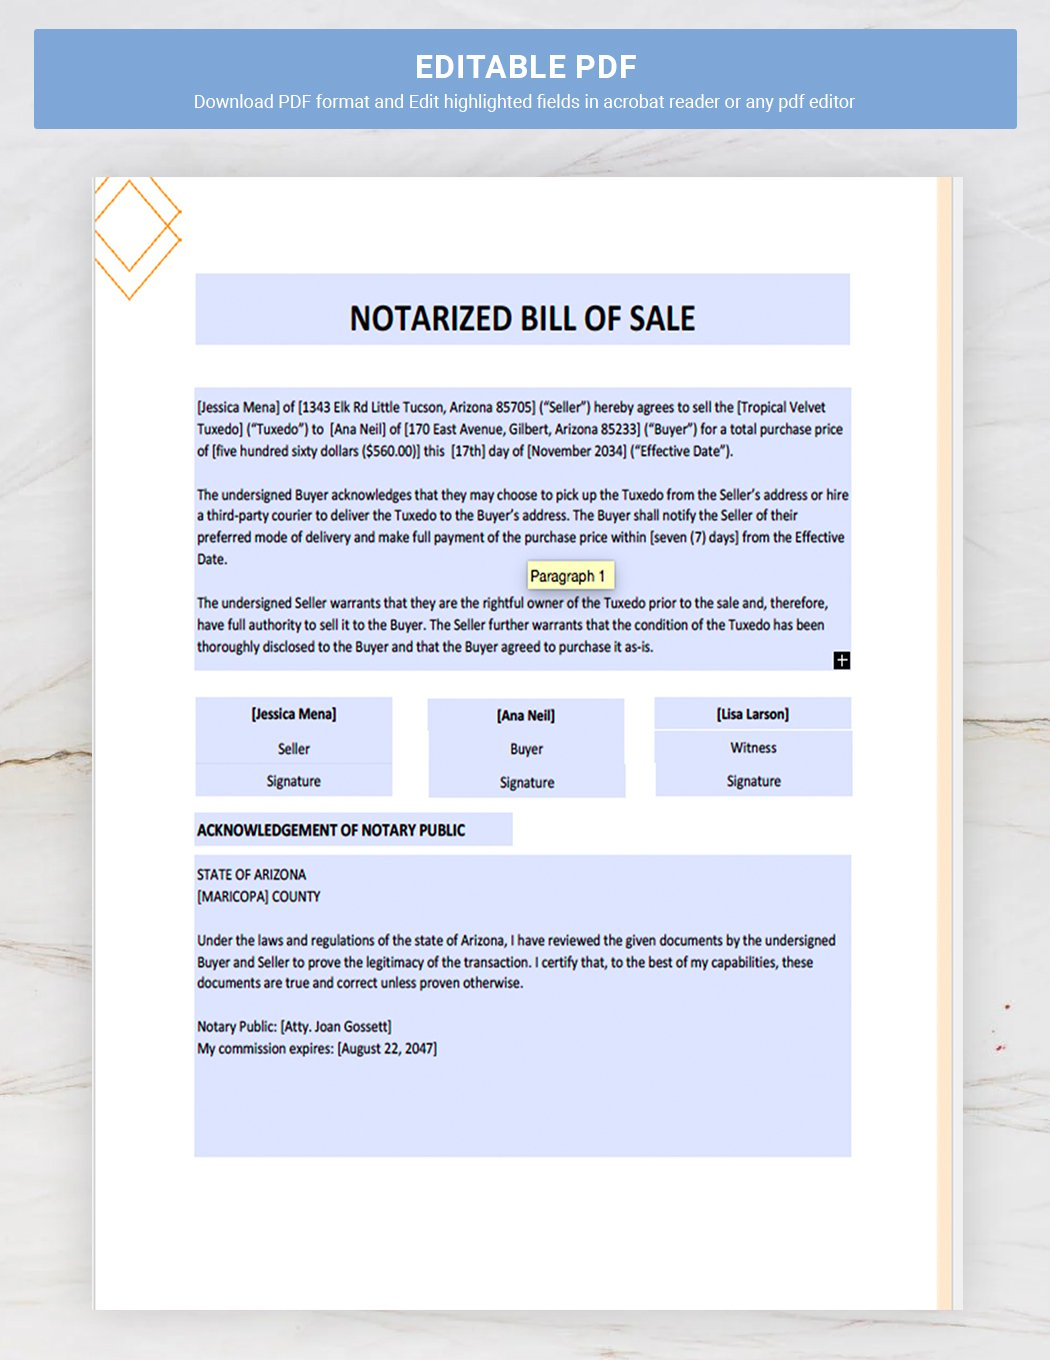 Notarized Bill of Sale Template